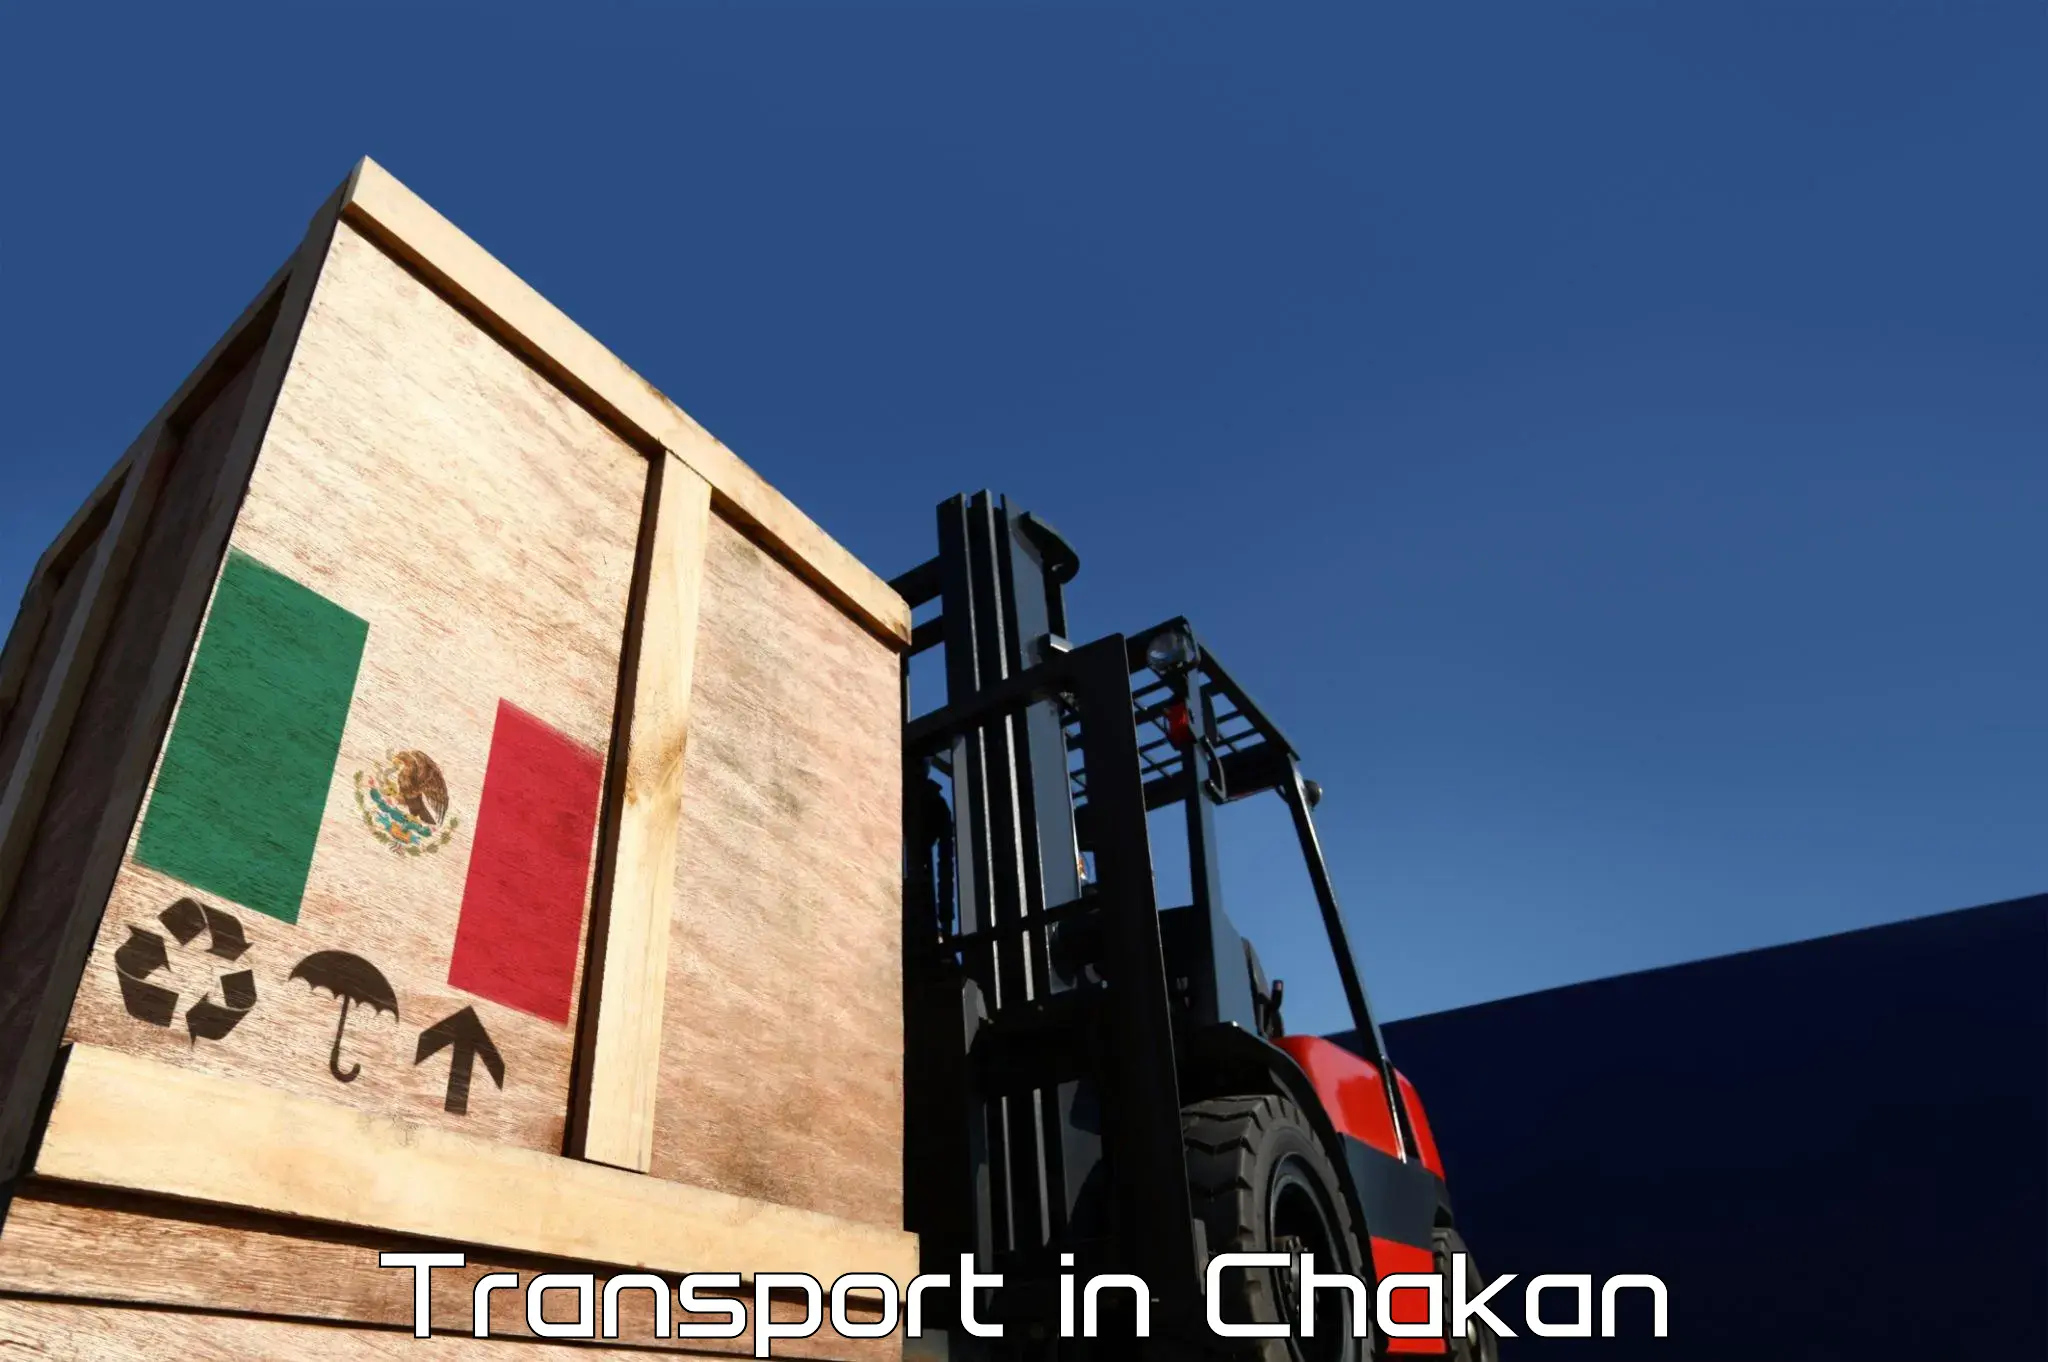 Land transport services in Chakan